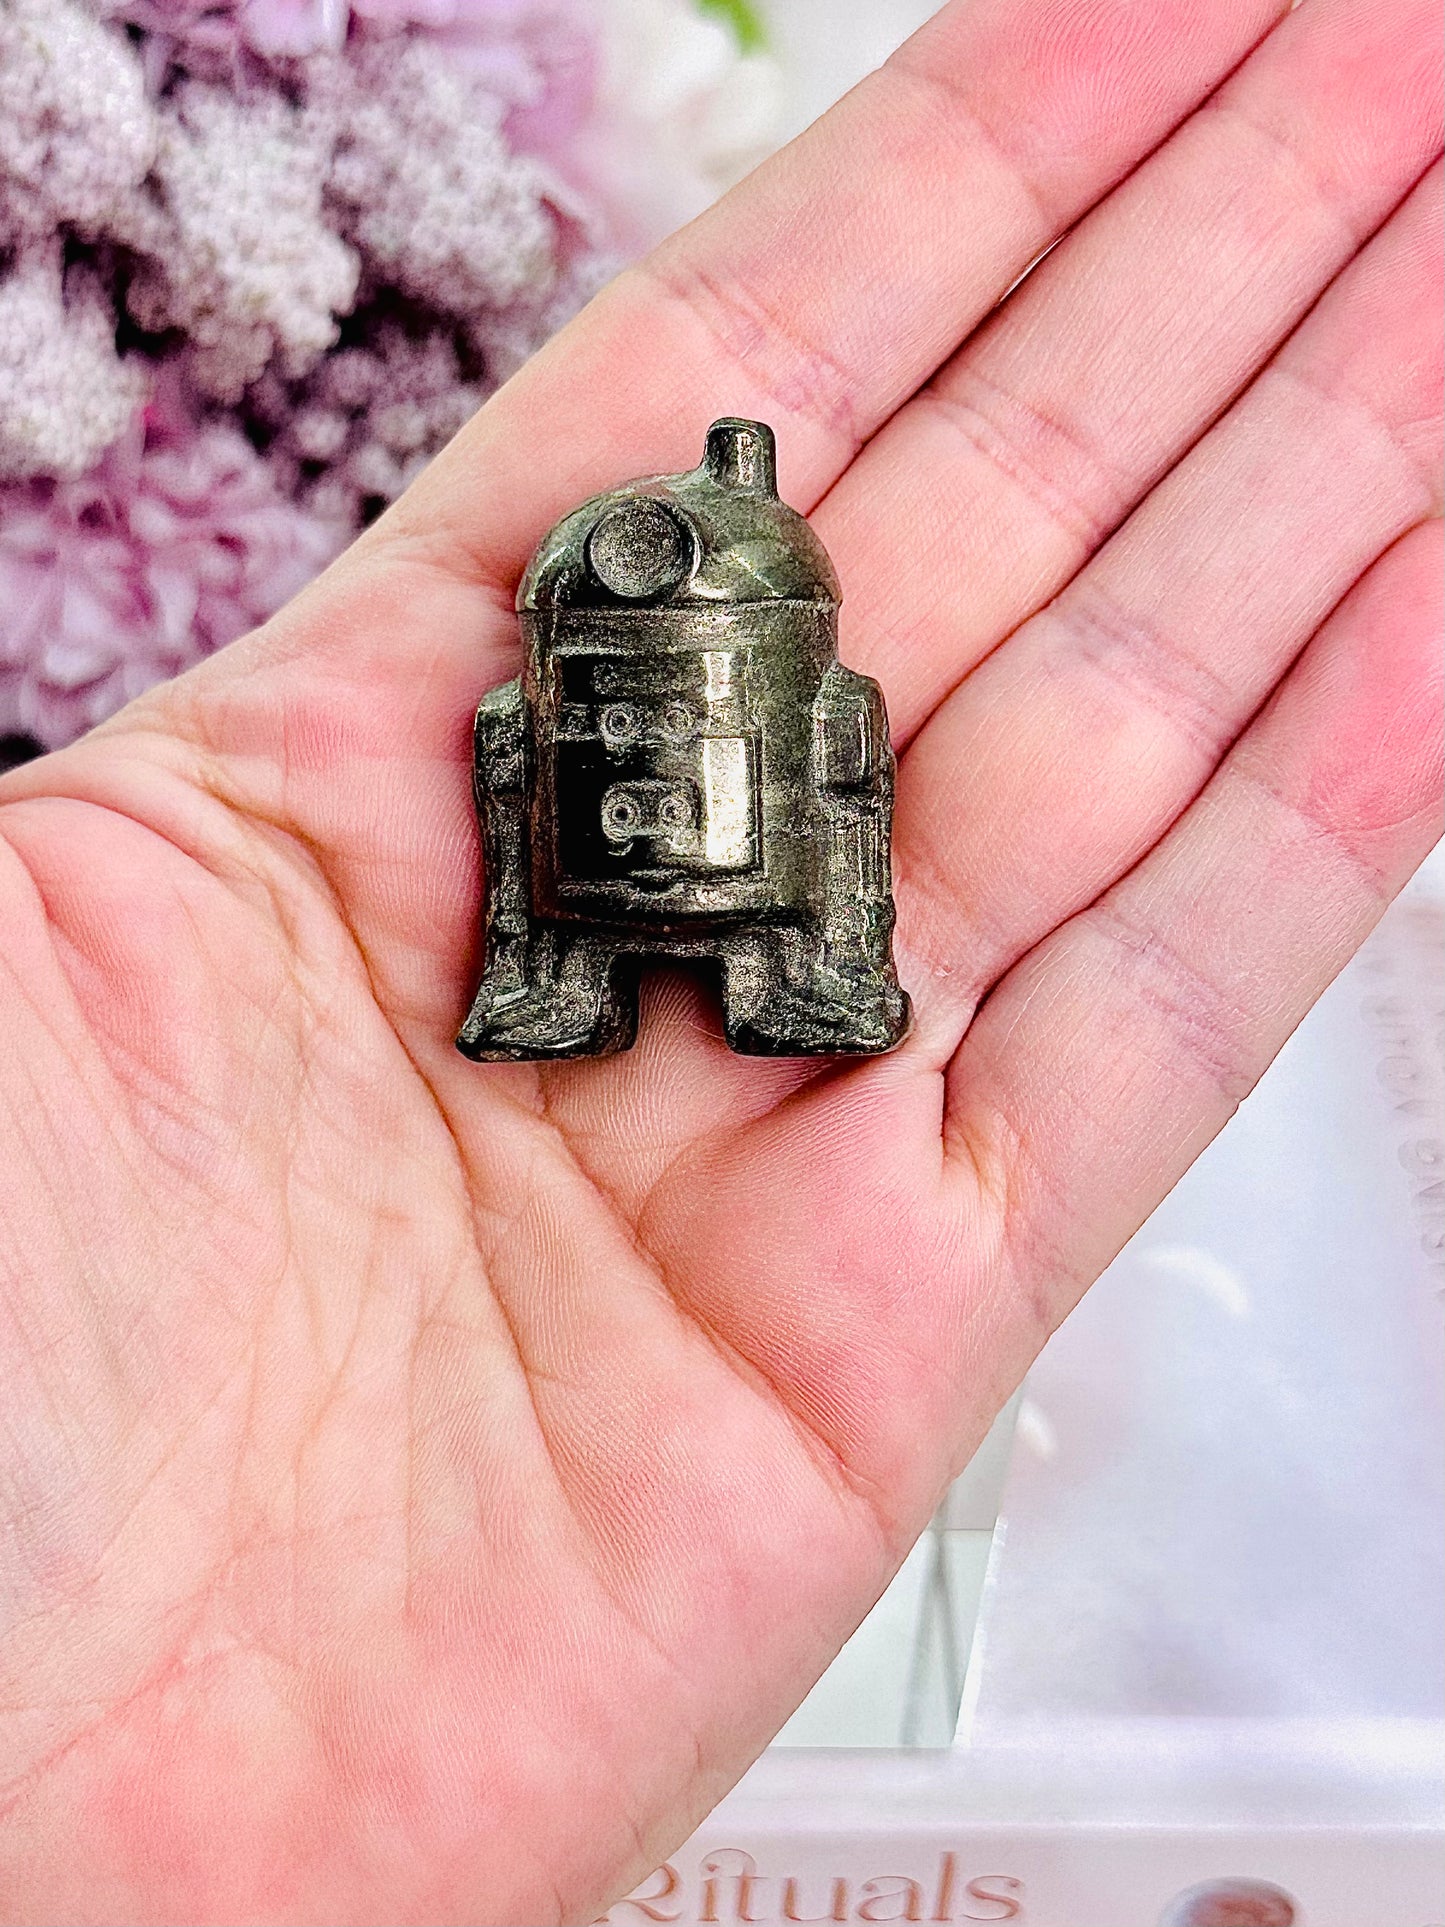 Beautifully Carved Pyrite R2-D2